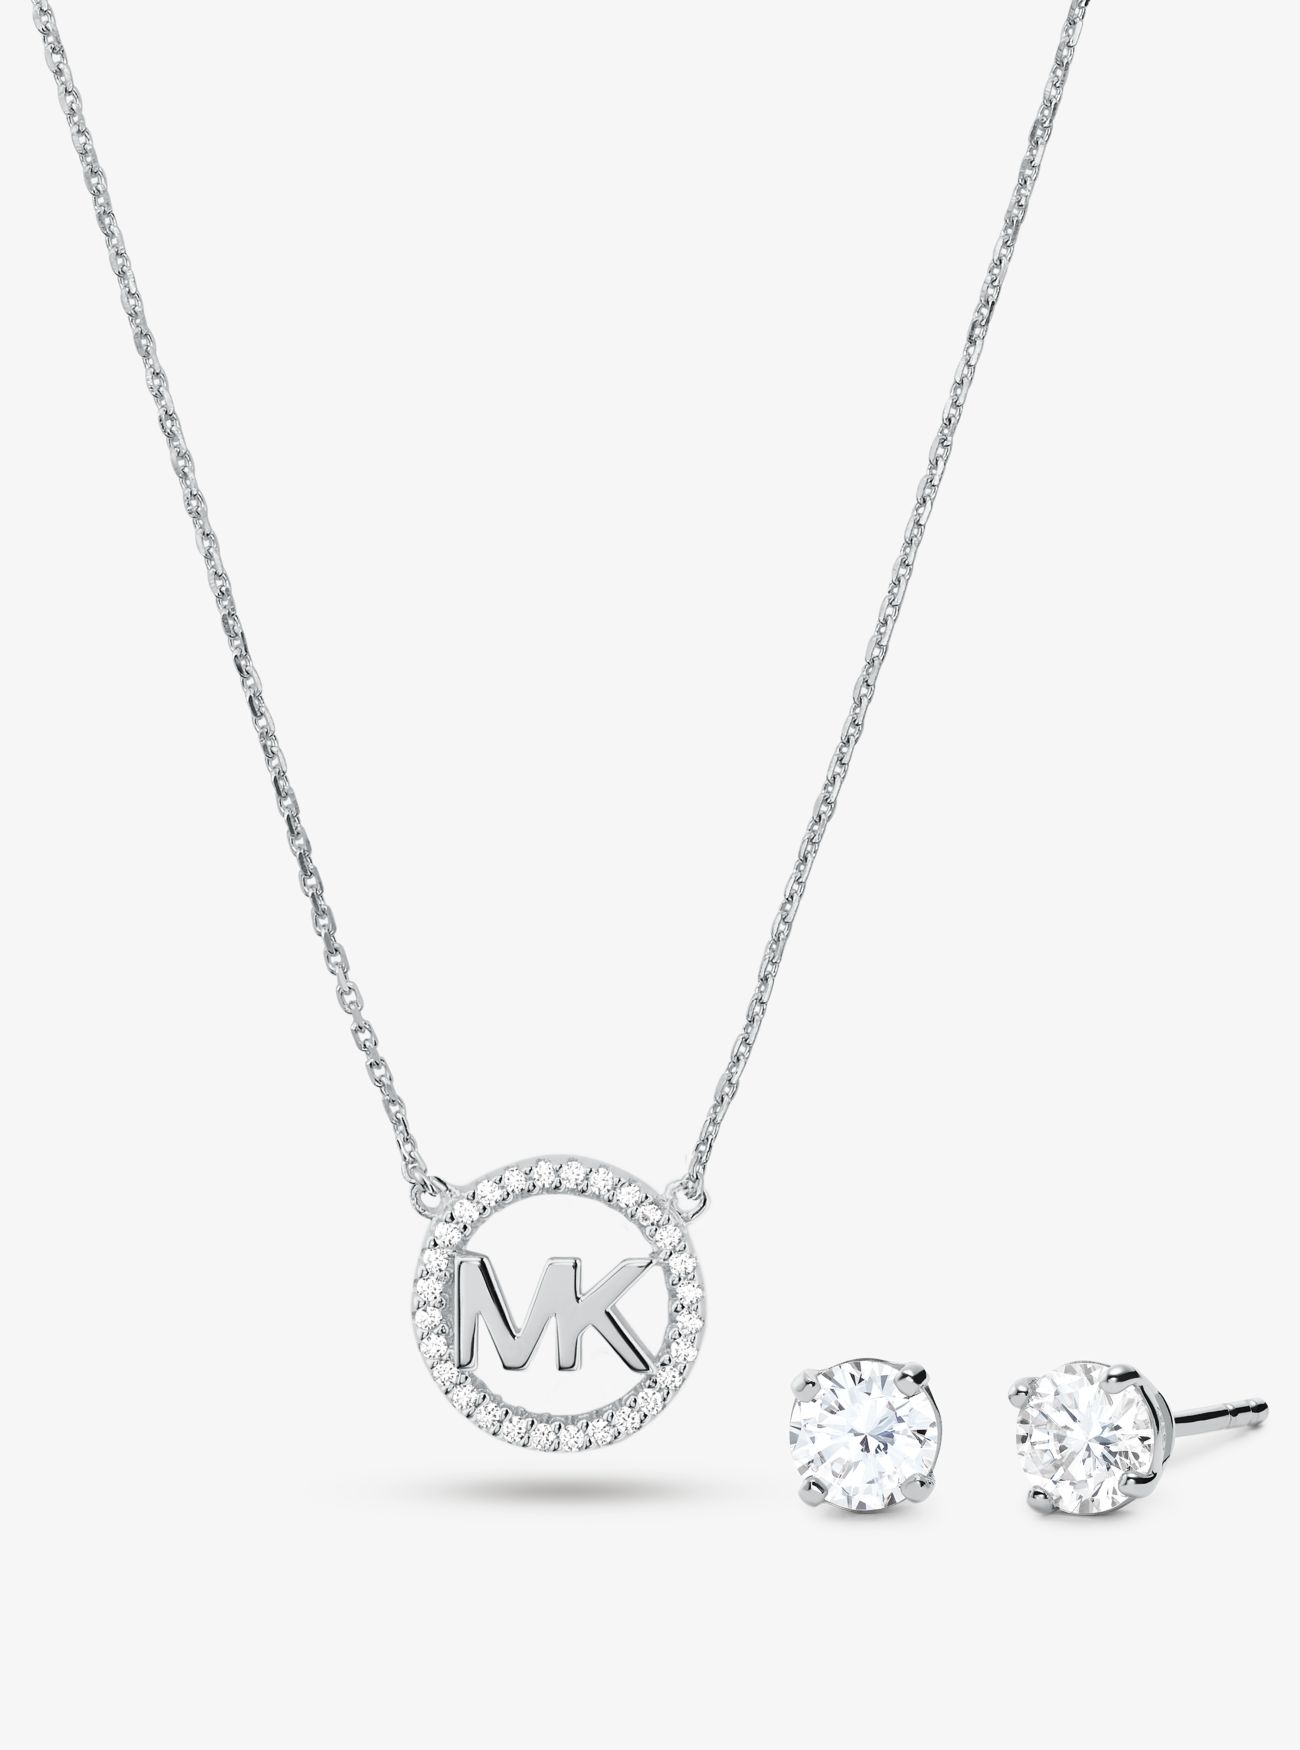 MK 14K Rose Gold-Plated Sterling Silver PavÃ© Logo Charm Necklace and Stud Earrings Set - Silver - Michael Kors